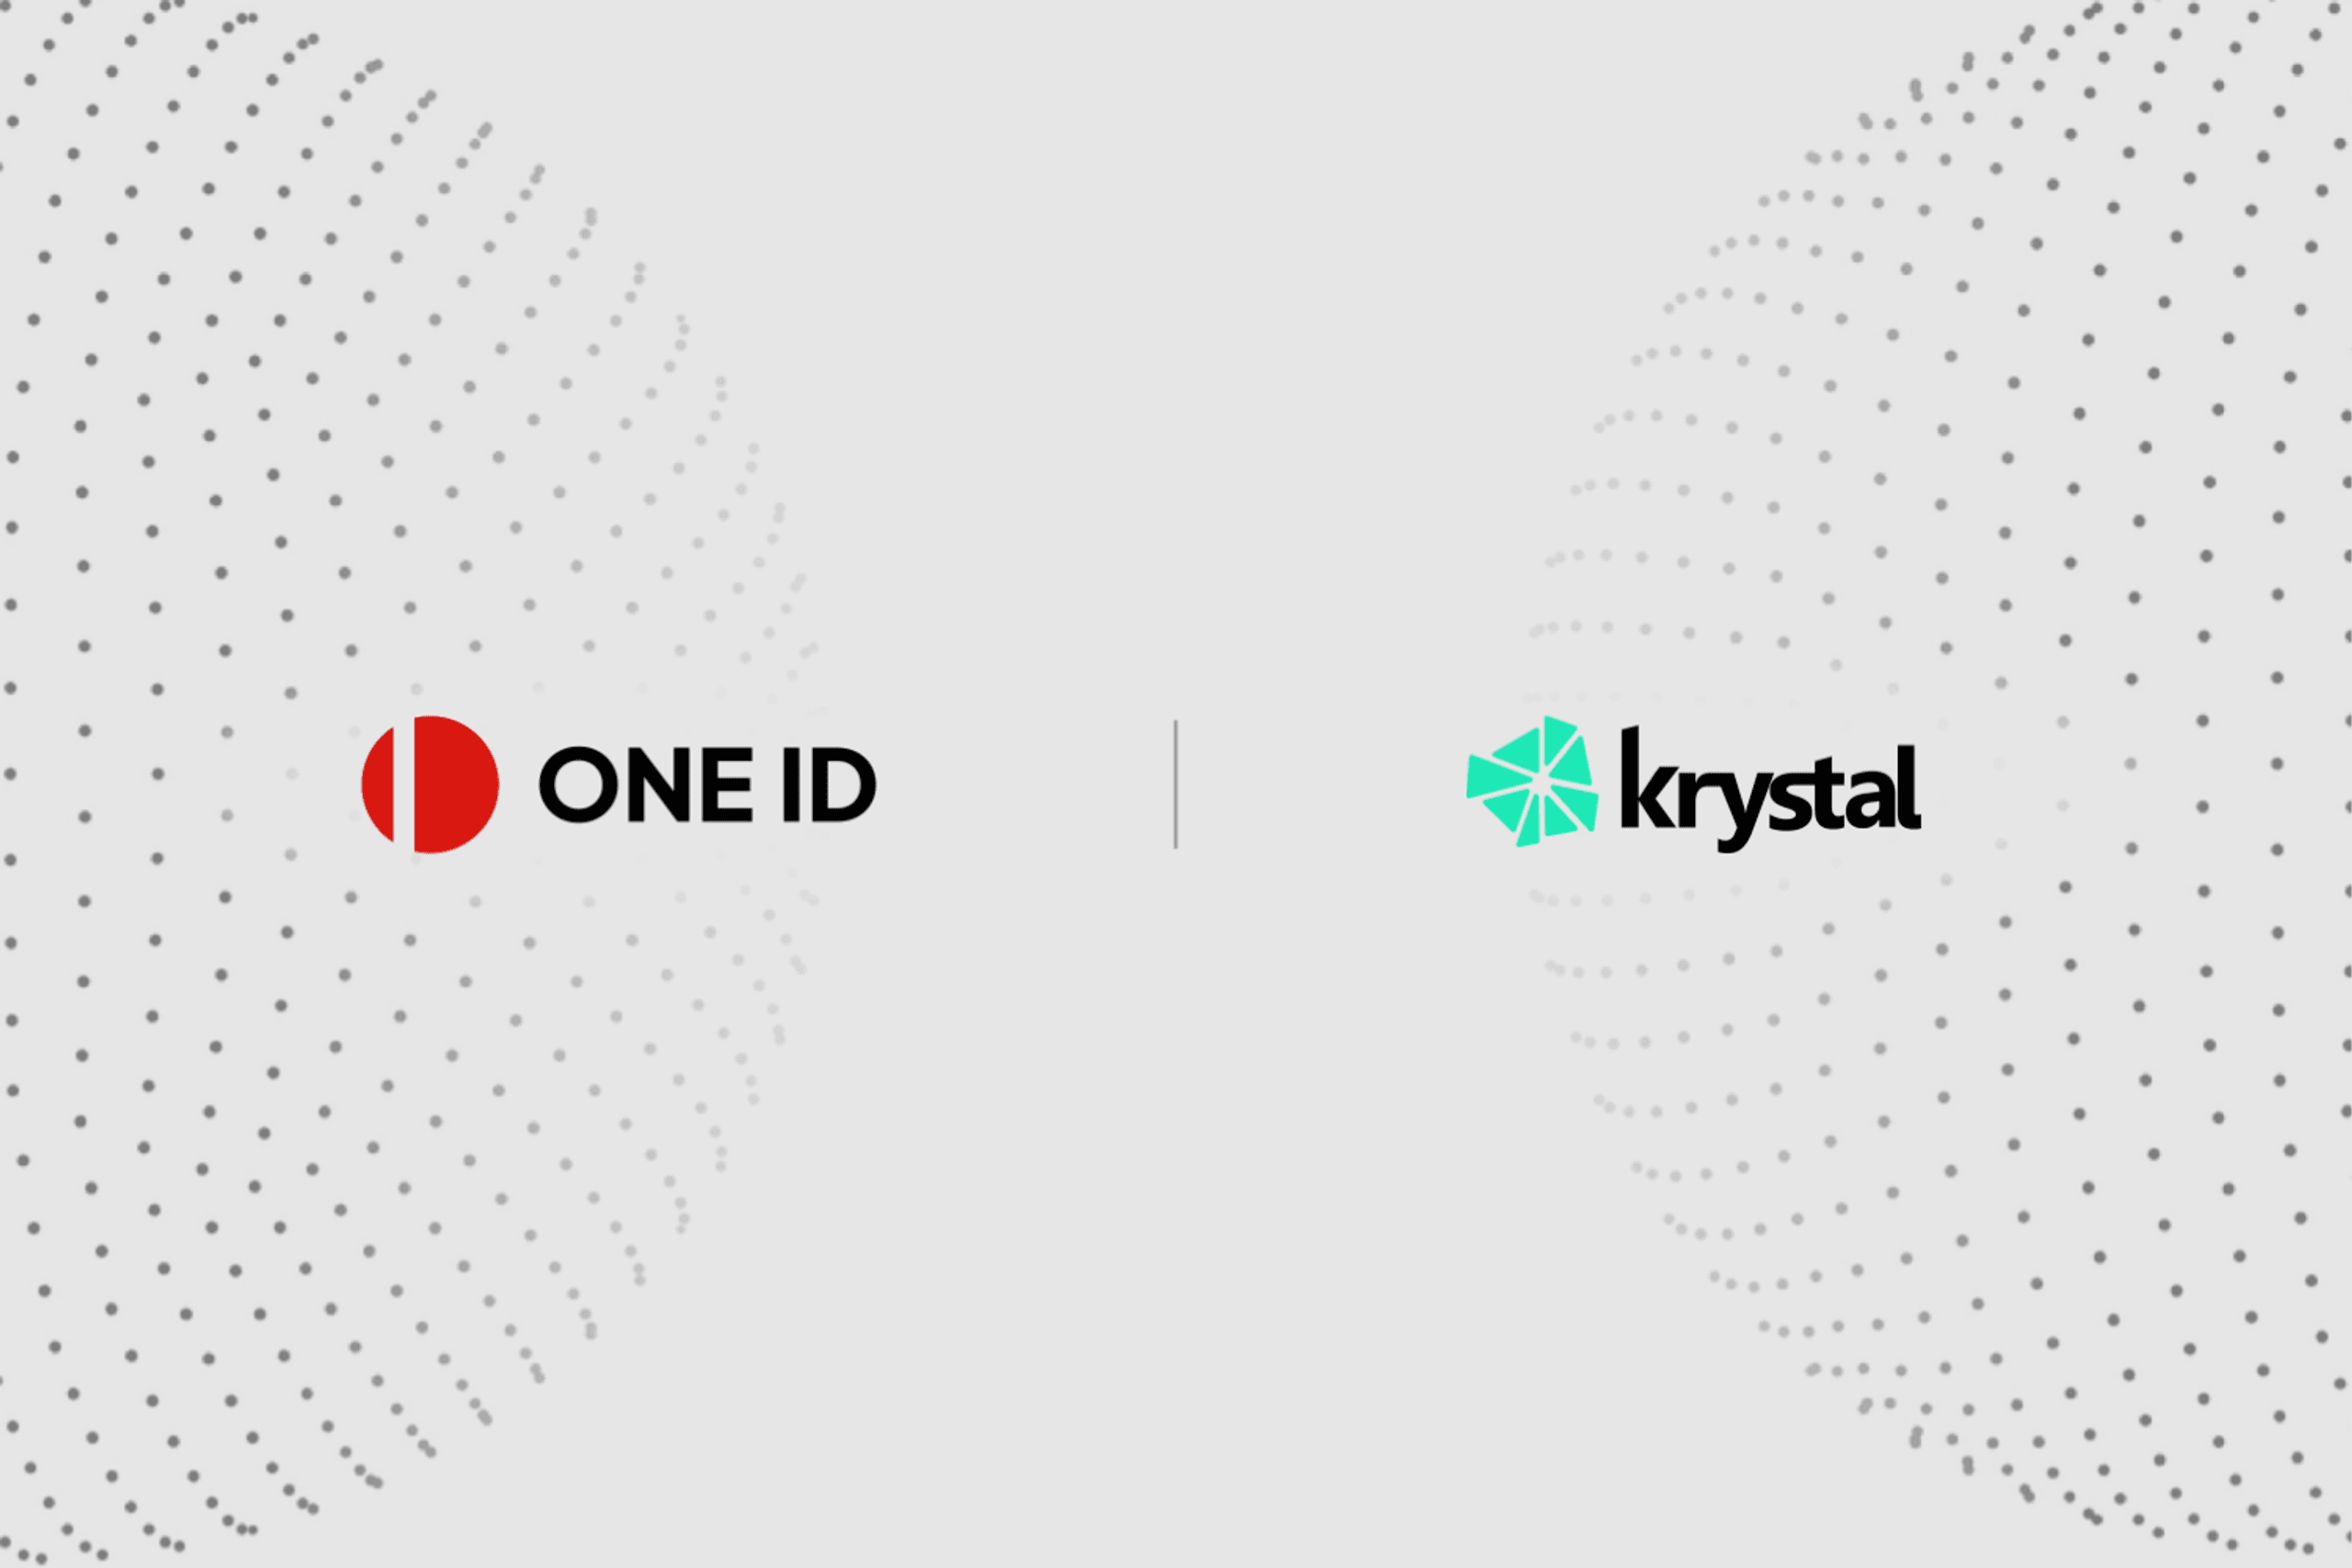 OneID and Krystal Join Forces to Simplify & Streamline User’s DeFi Journey